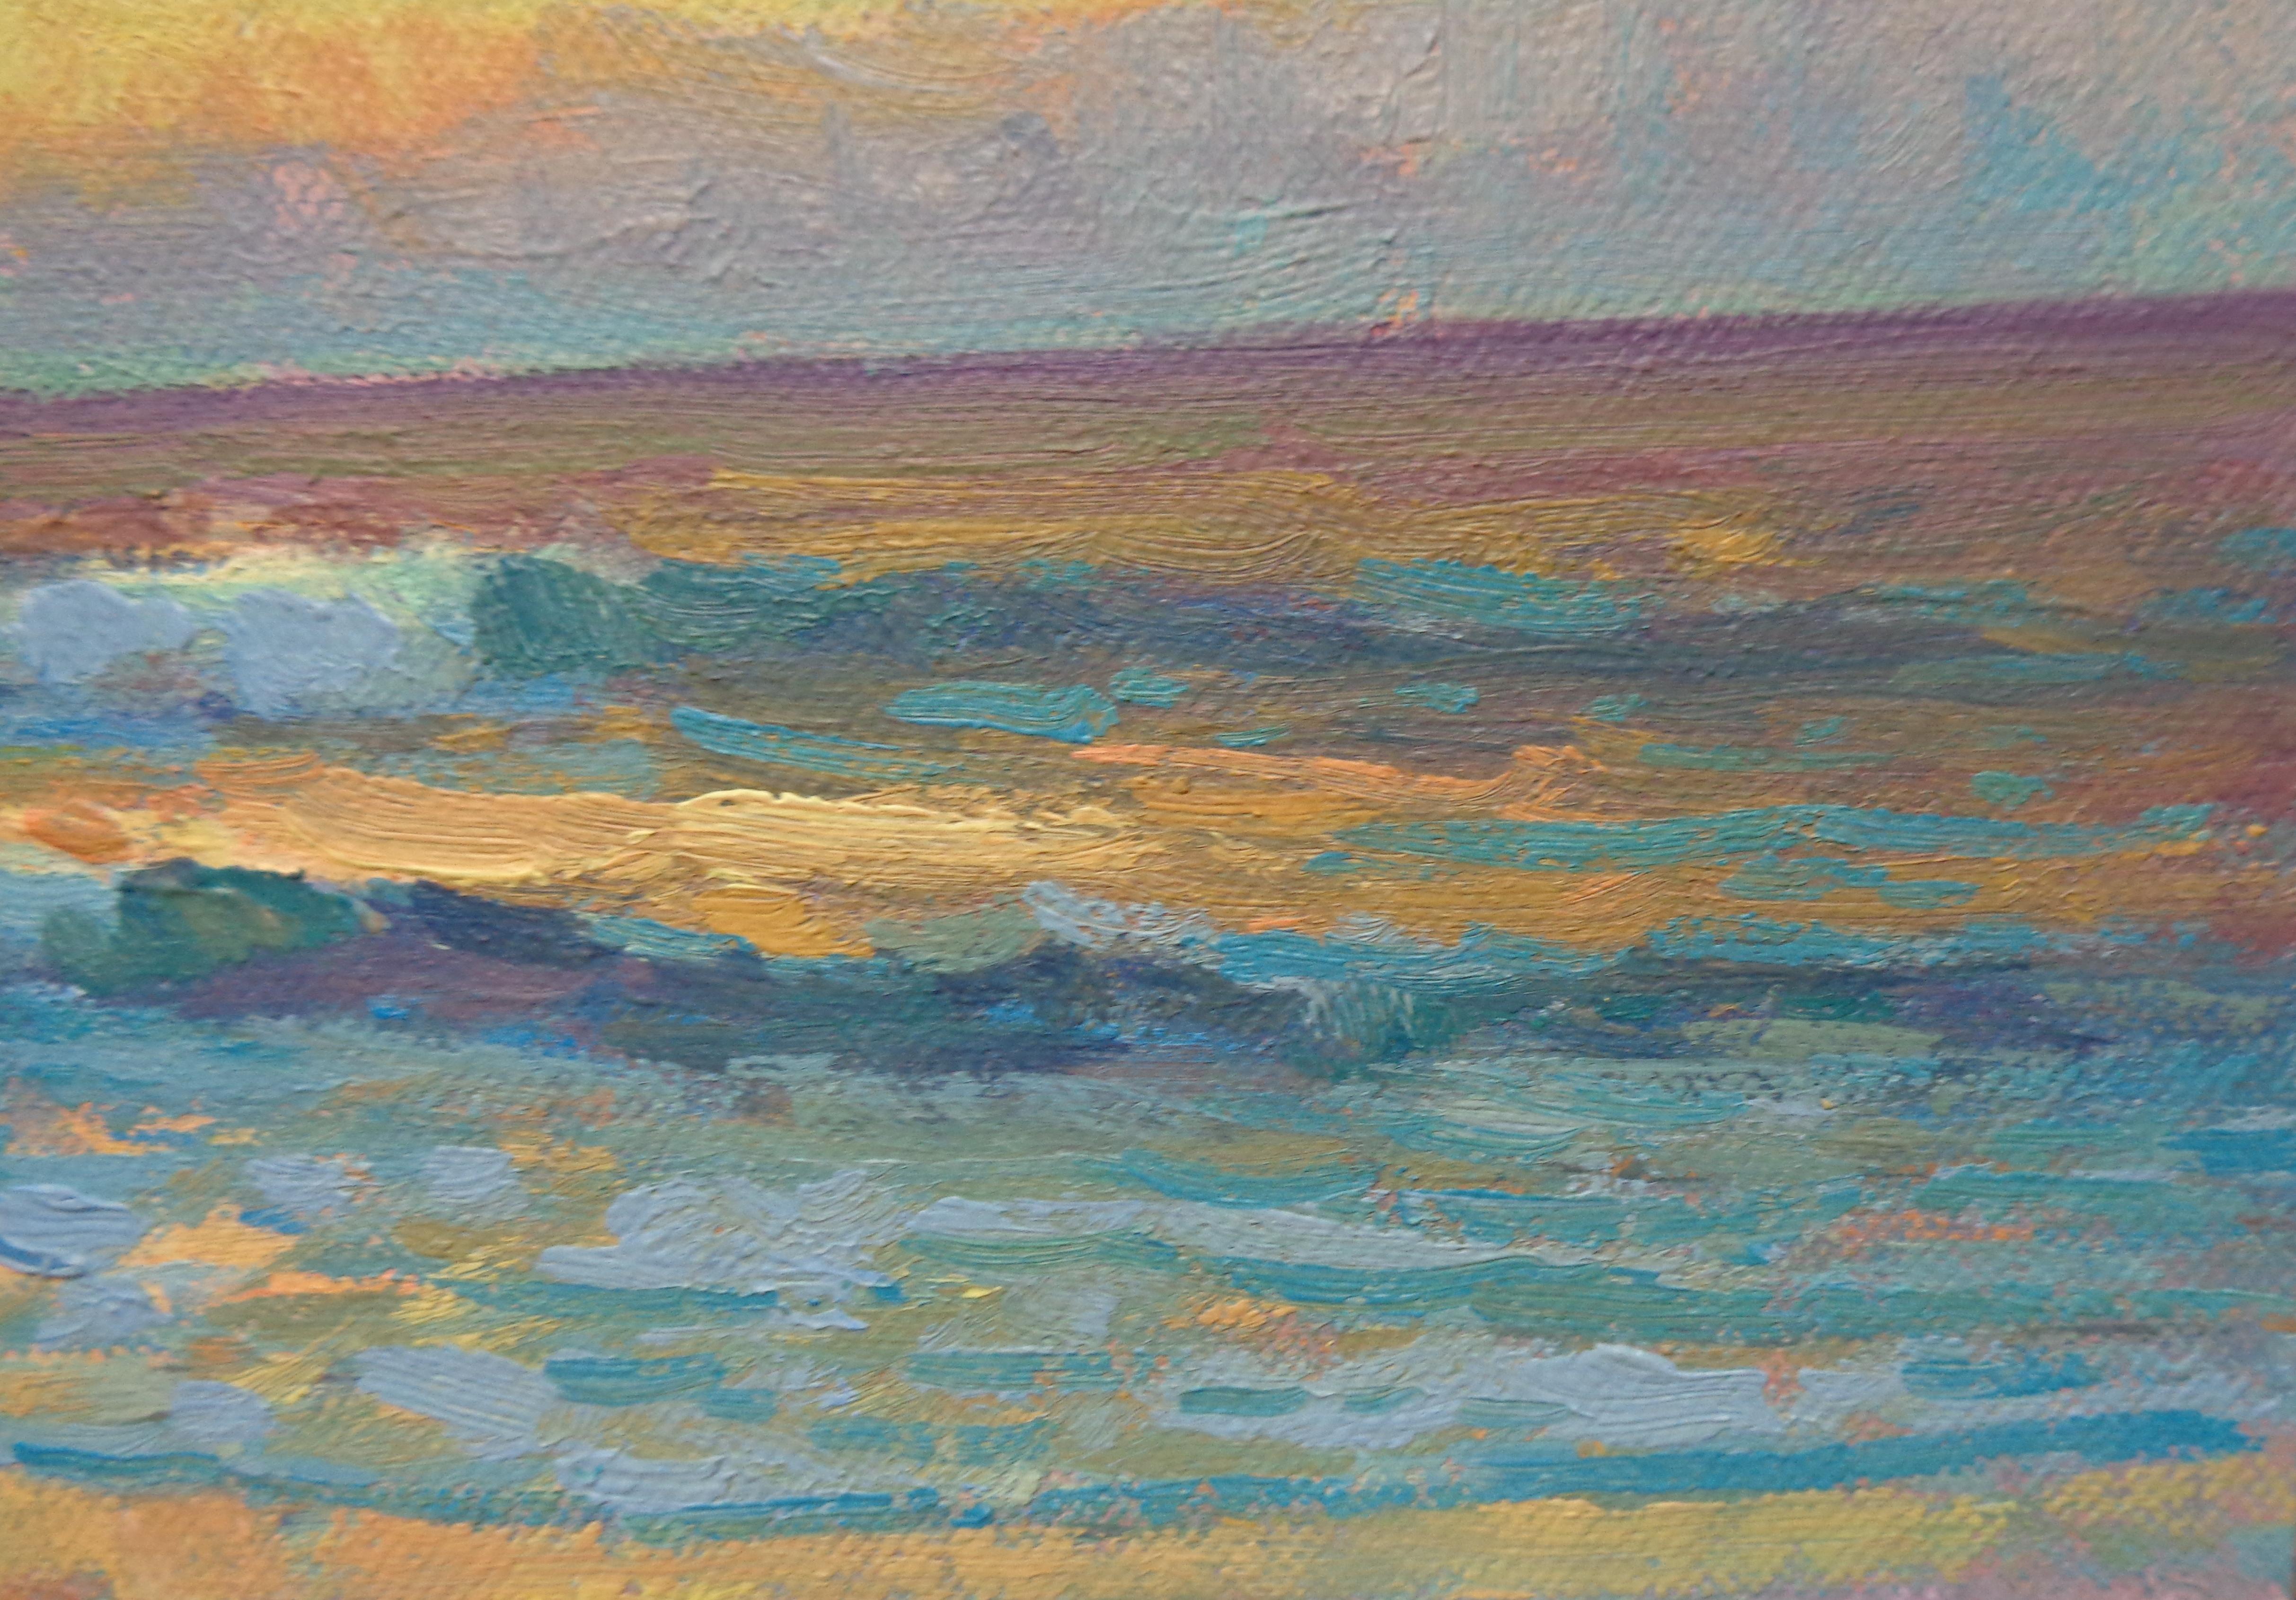 Ocean Beach Seascape Study Oil Painting  by Michael Budden Sunrise Series For Sale 3